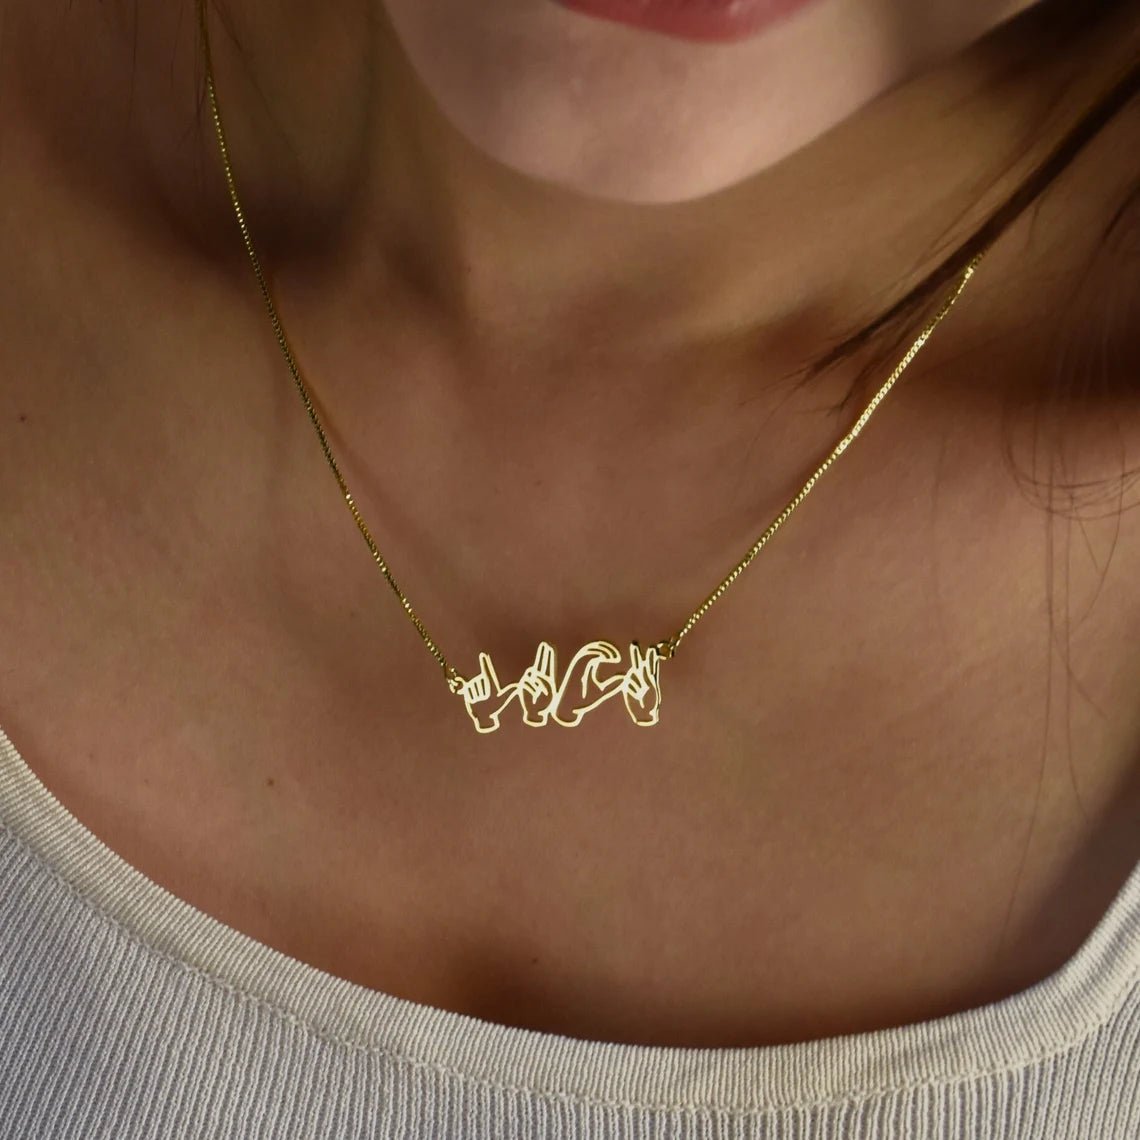 Personalized Name Necklace in Sign Language